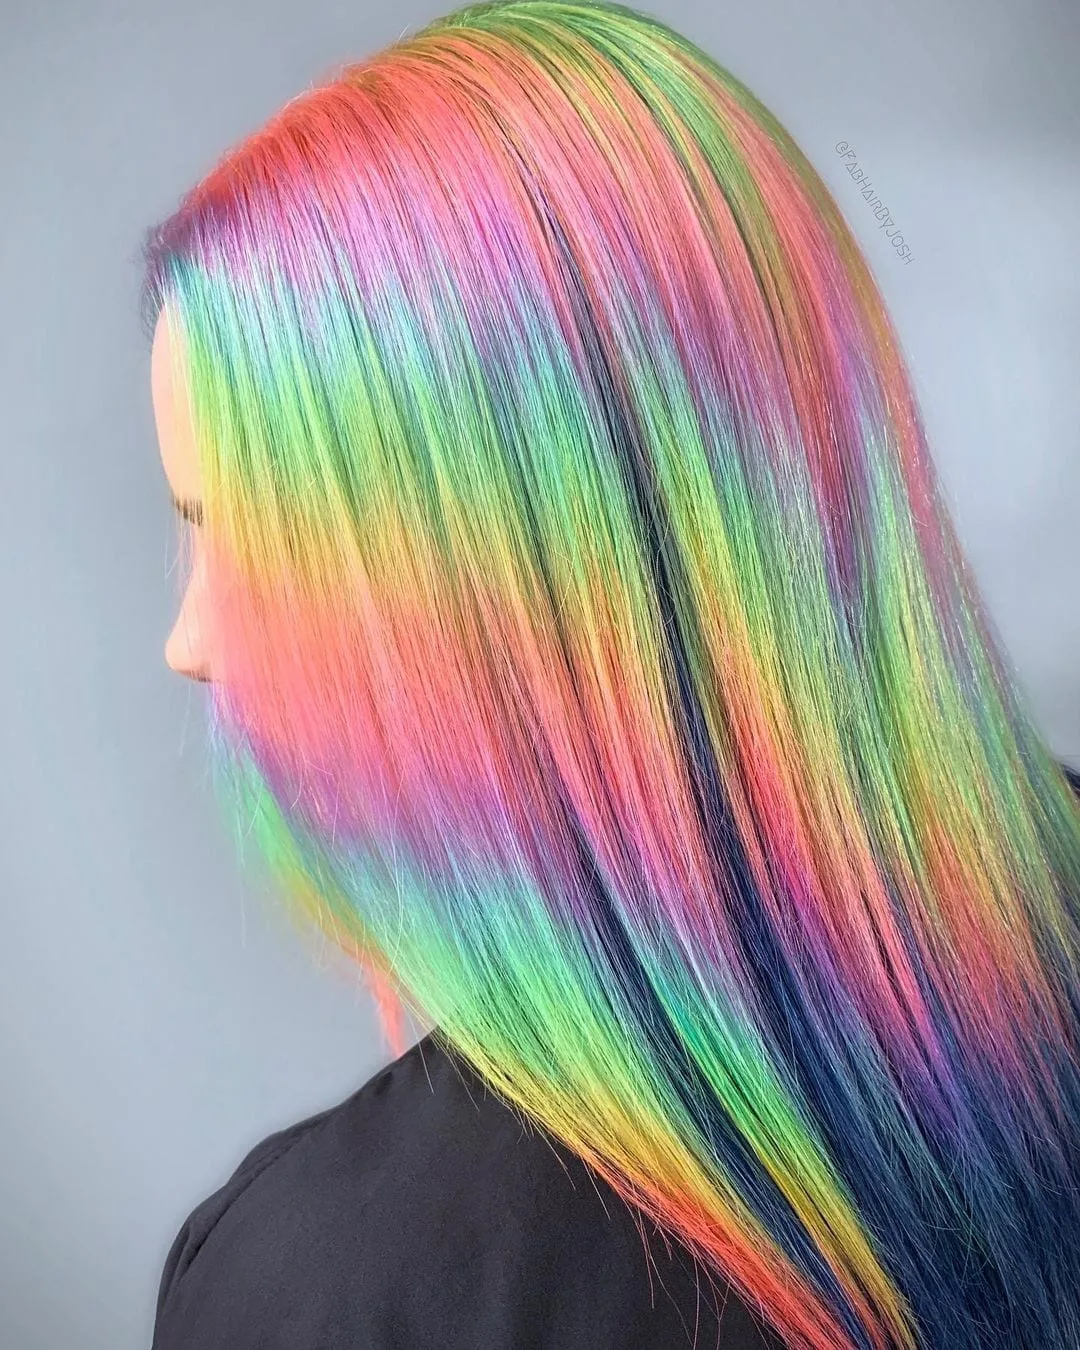 Bright rainbow colored hair (holographic hair) featuring shimmers of all colors in the rainbow